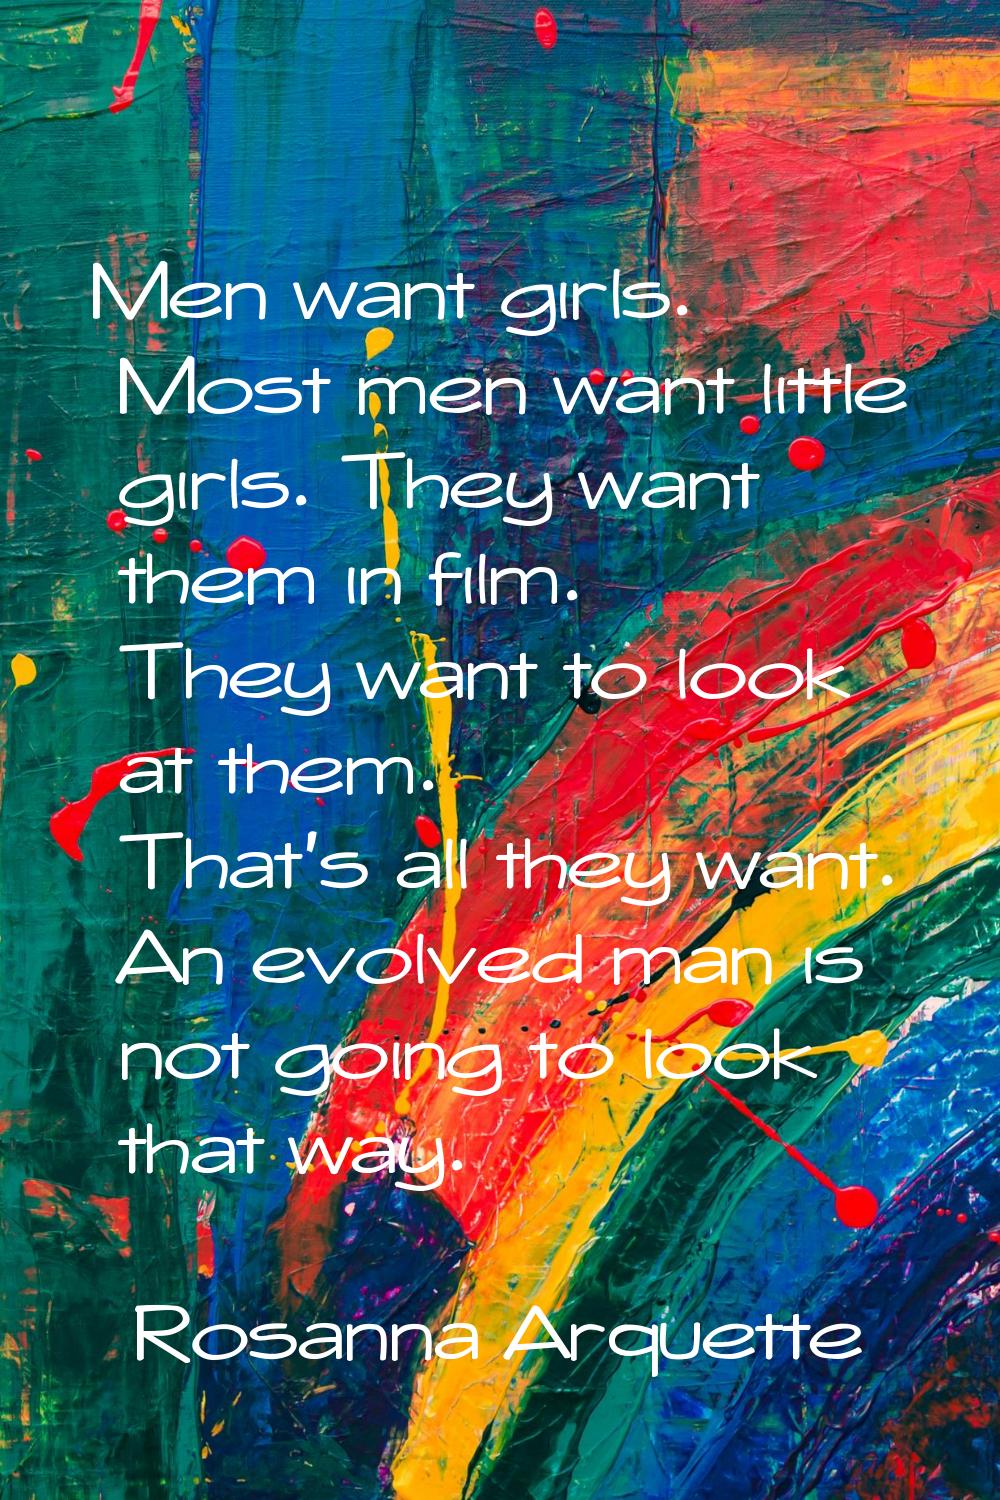 Men want girls. Most men want little girls. They want them in film. They want to look at them. That